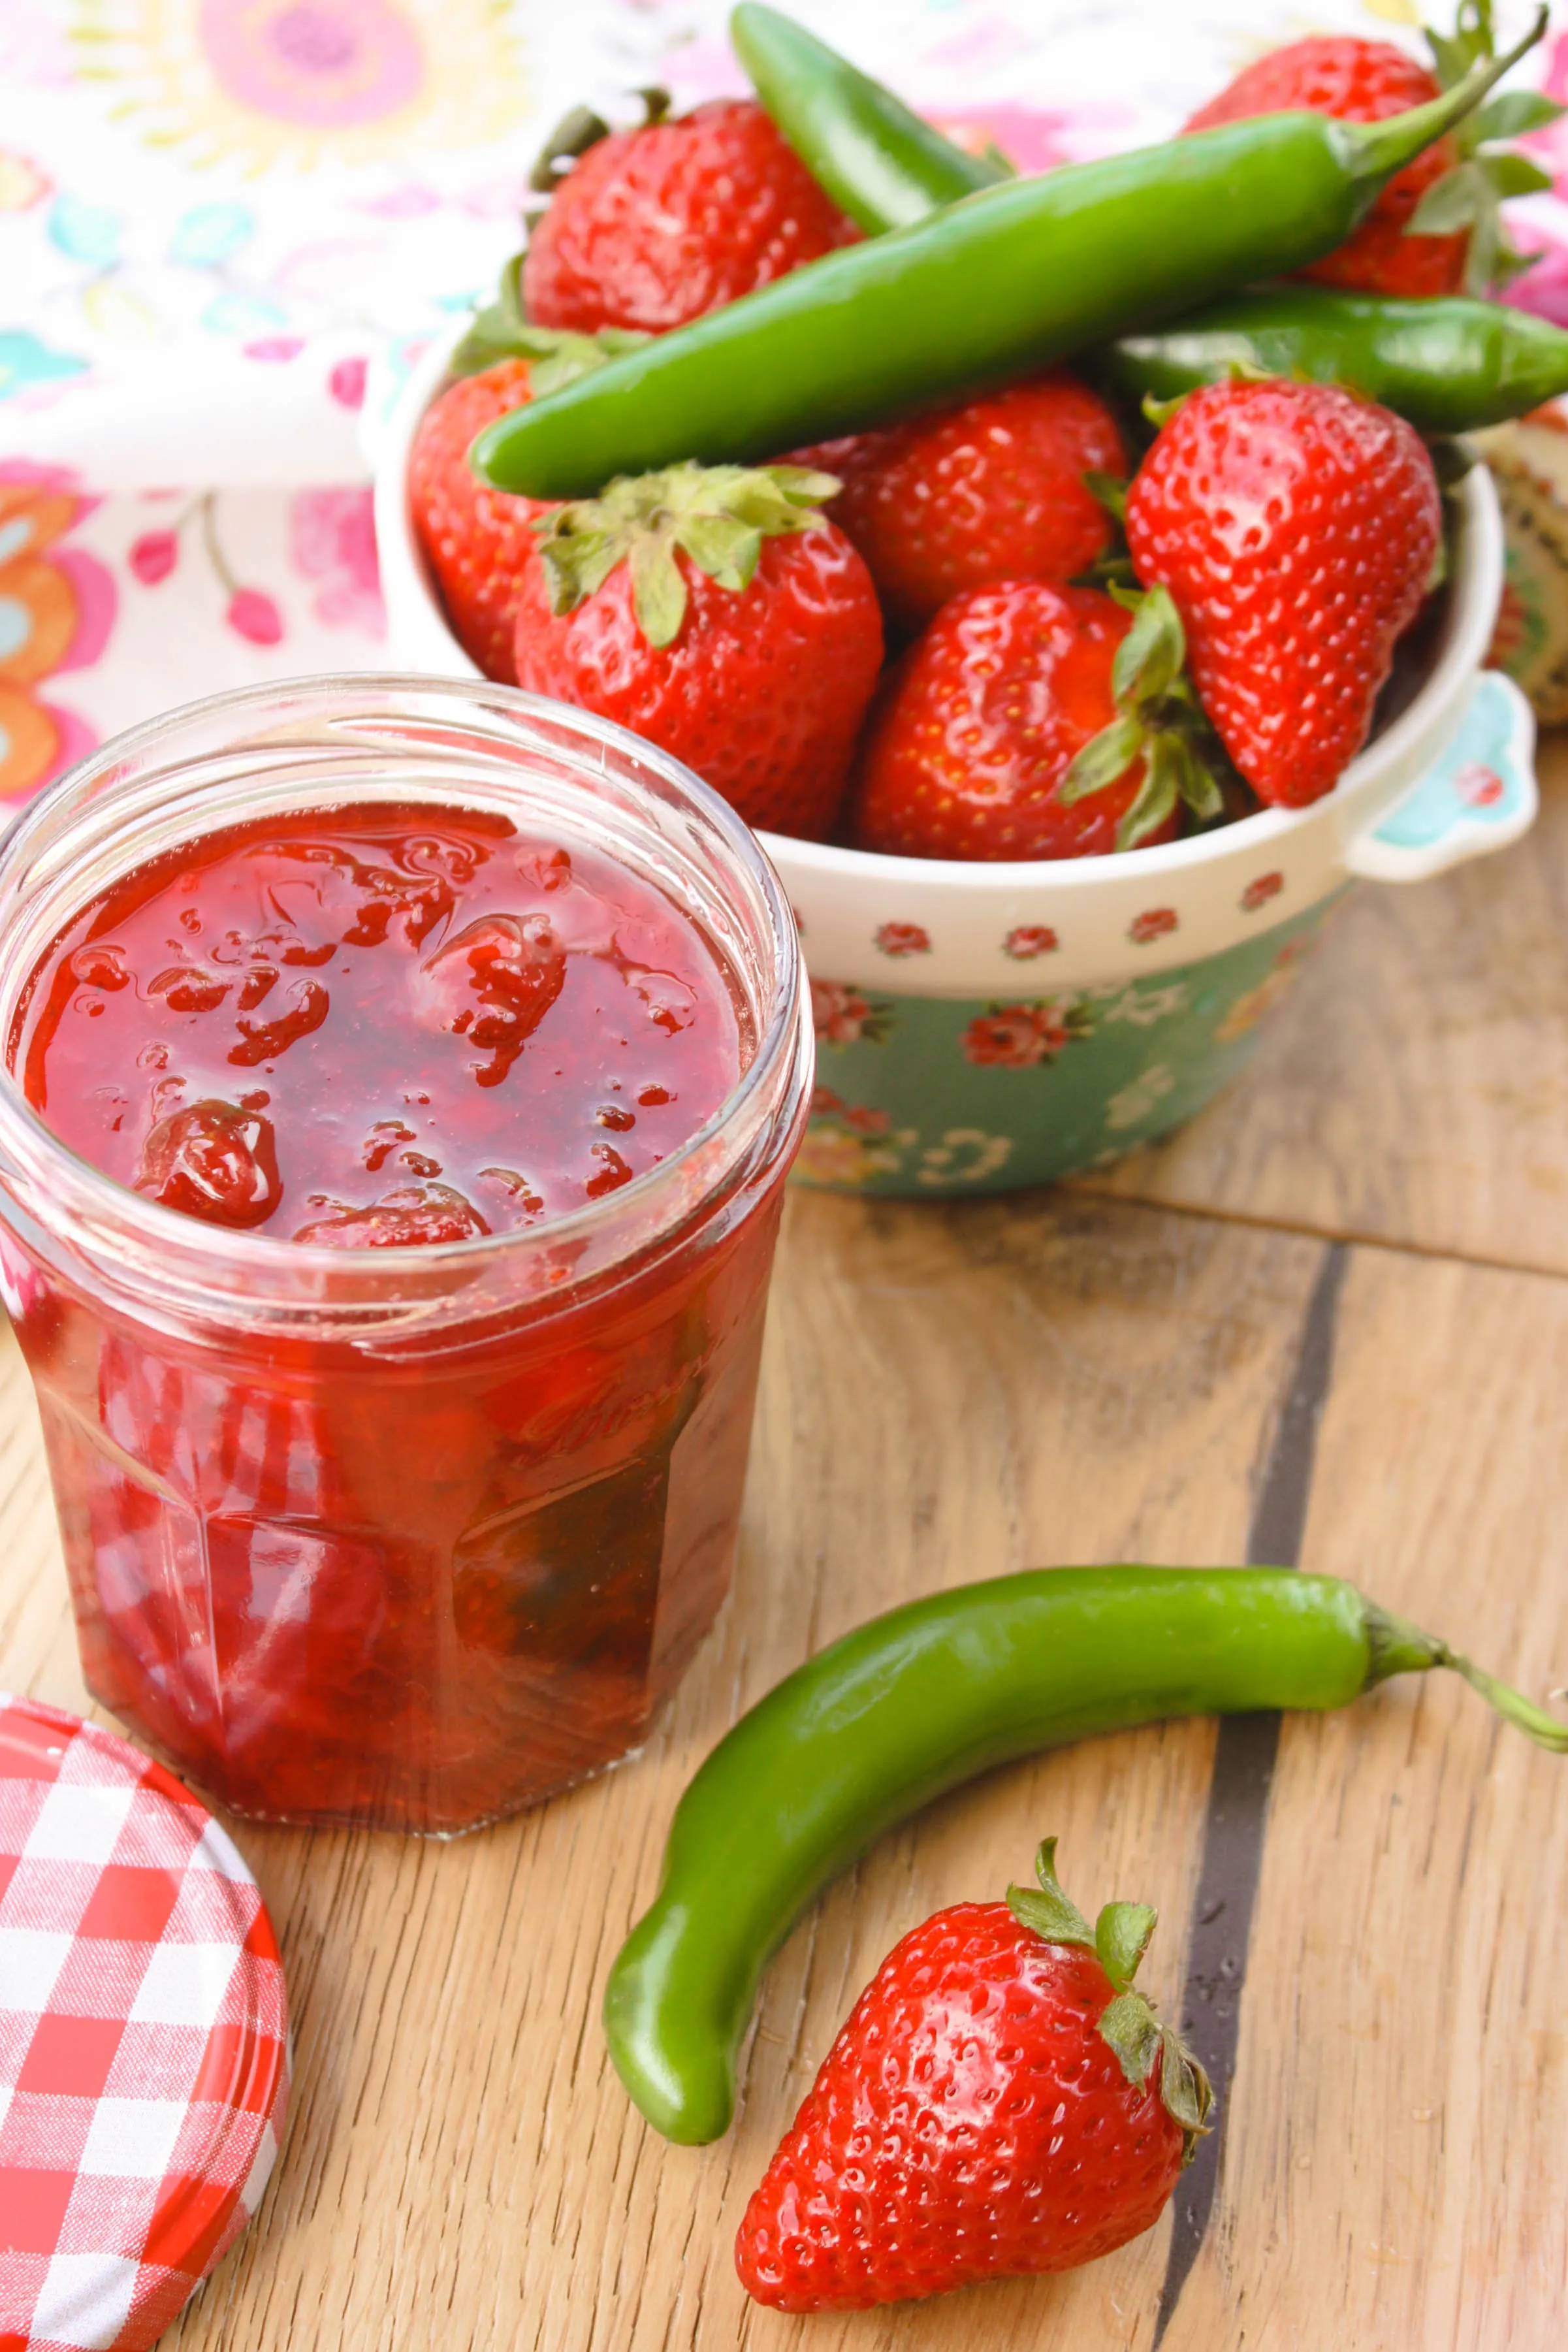 Small batch strawberry-serrano refrigerator jam is a delight. It's so easy to make, and delicious, too!